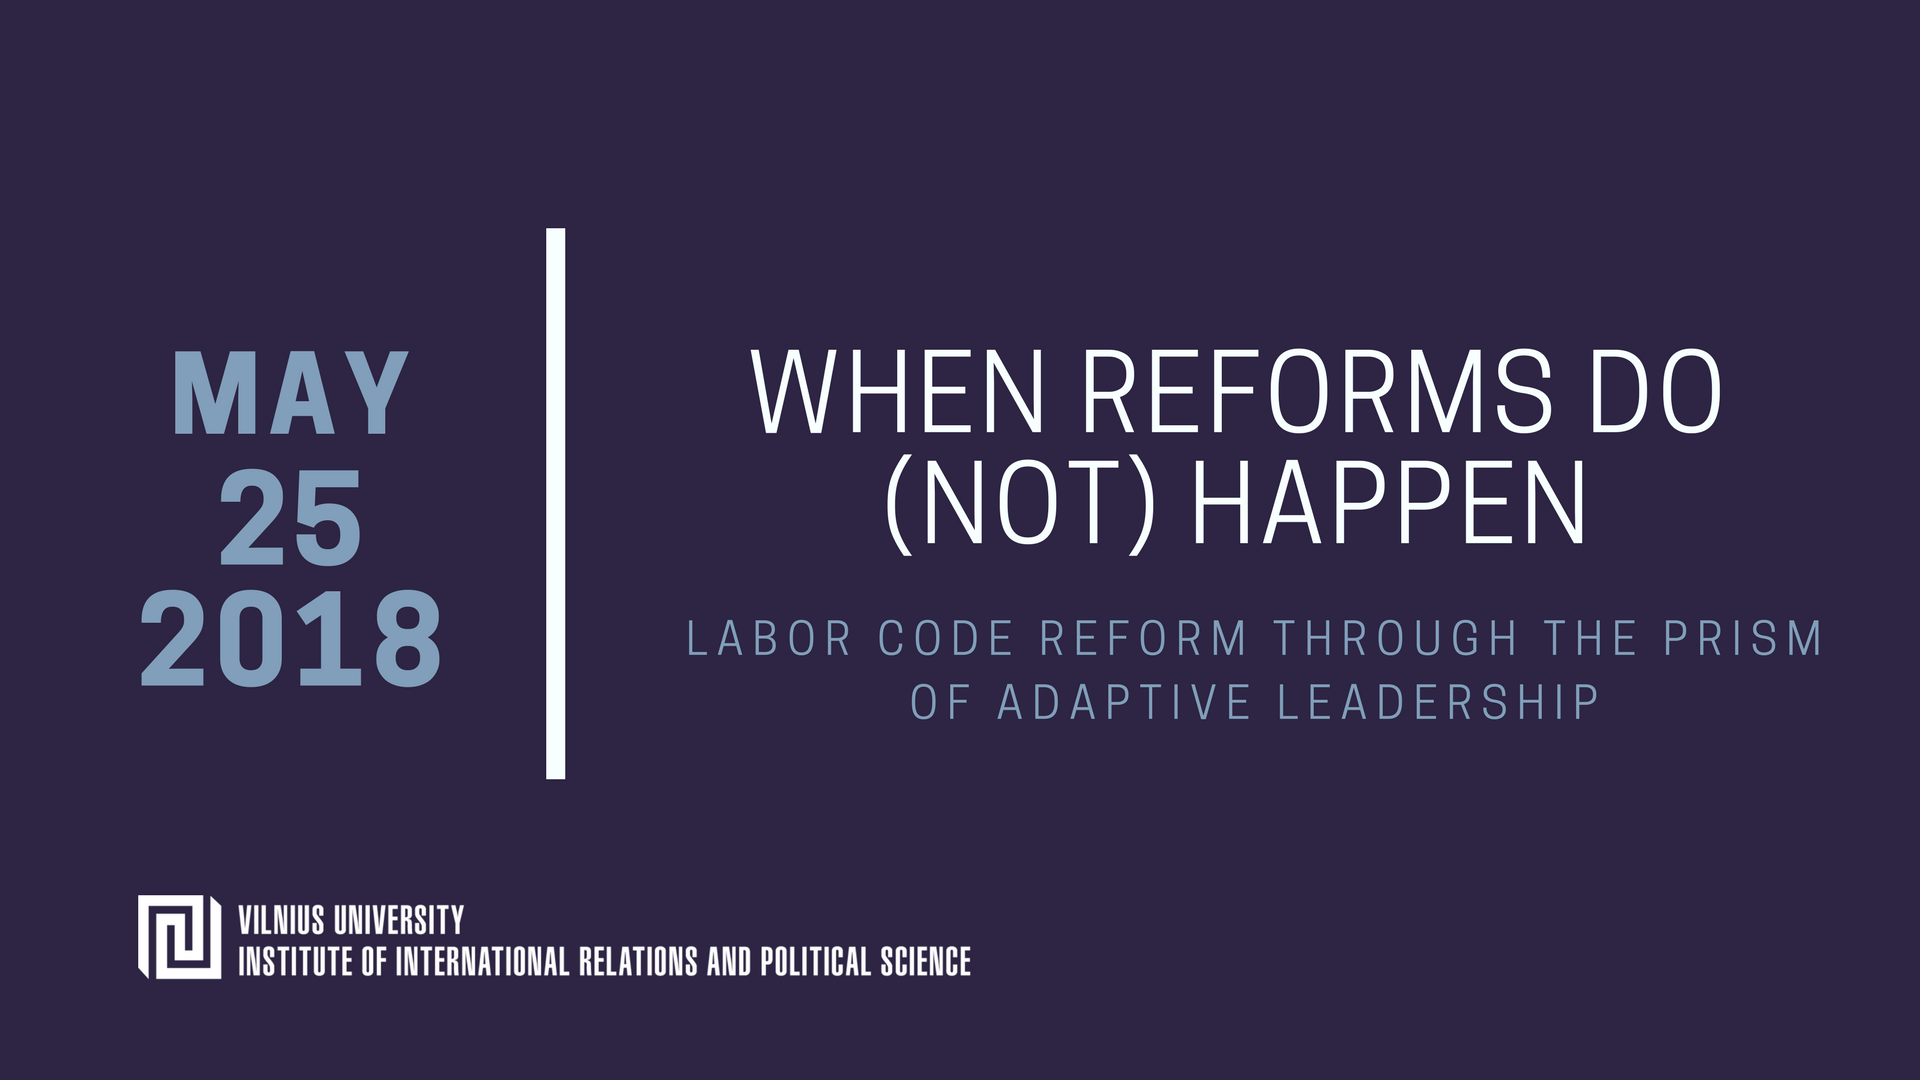 Conference “When Reforms Do (Not) Happen: Labor Code Reform Through the Prism of Adaptive Leadership”